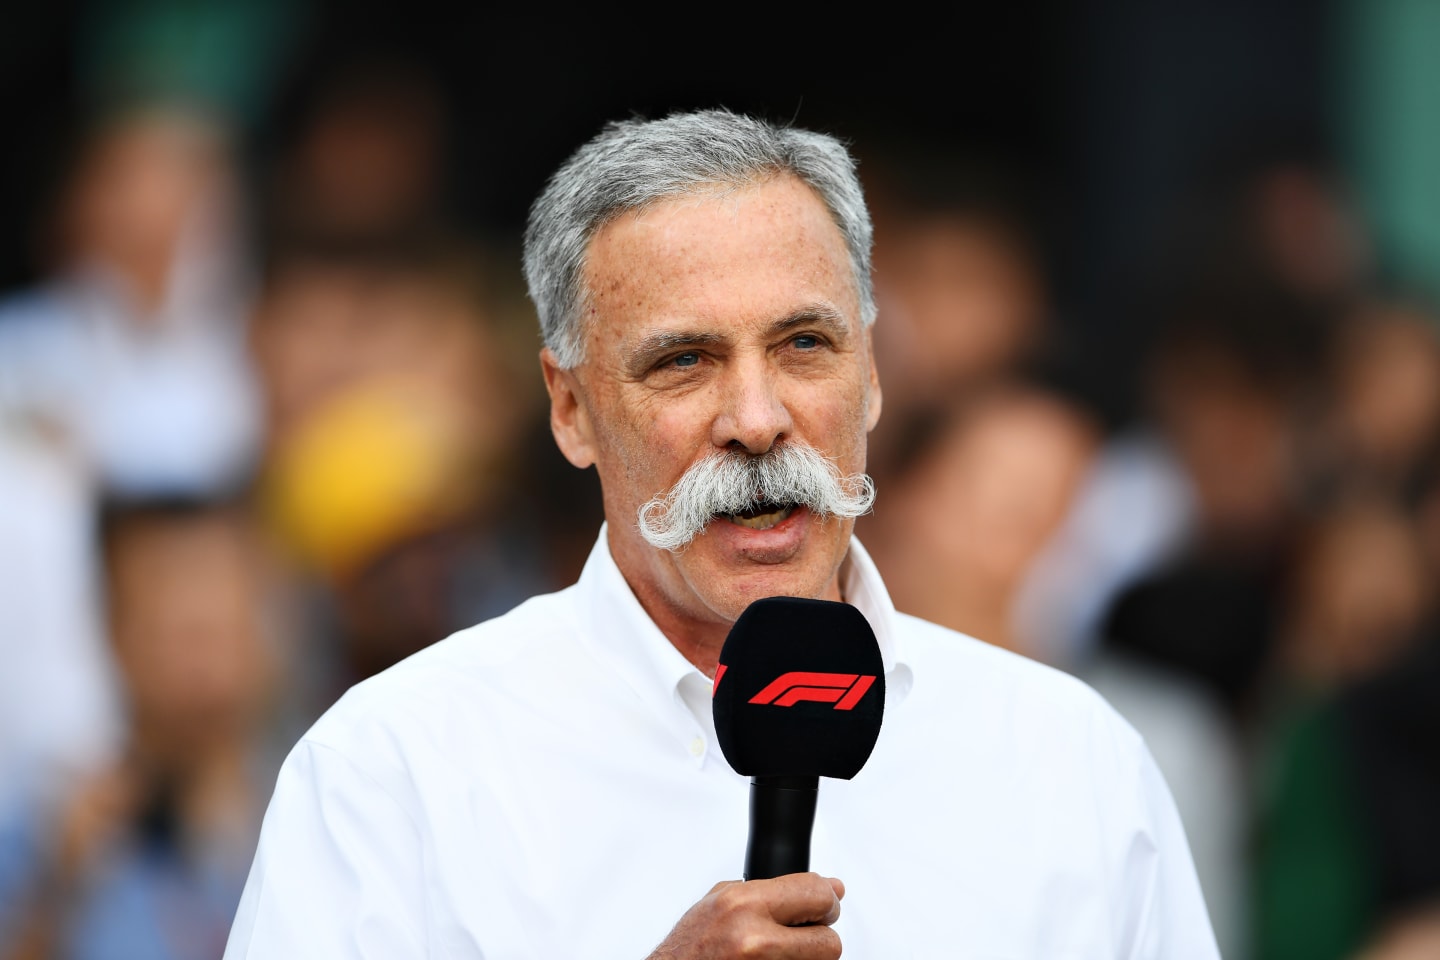 MELBOURNE, AUSTRALIA - MARCH 13: Chase Carey, CEO and Executive Chairman of the Formula One Group,